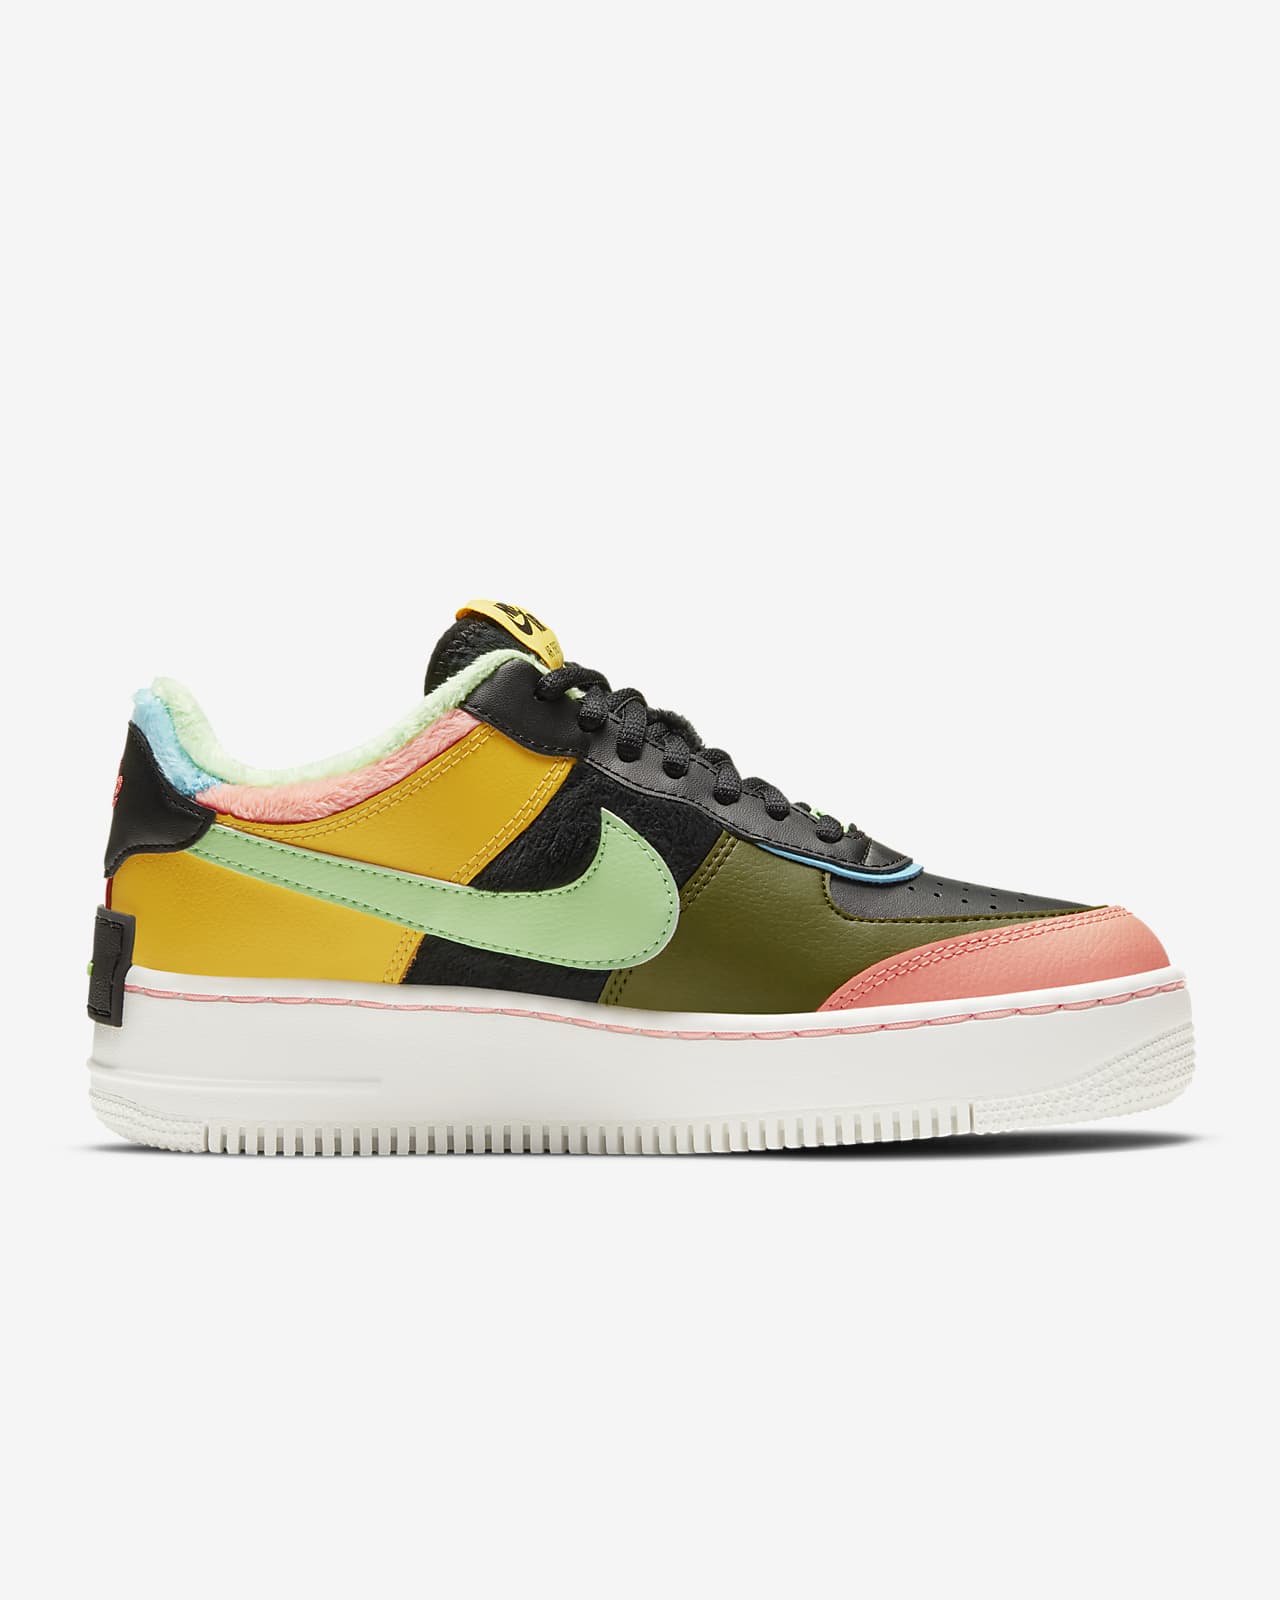 nike air force 1 shadow women's shoes